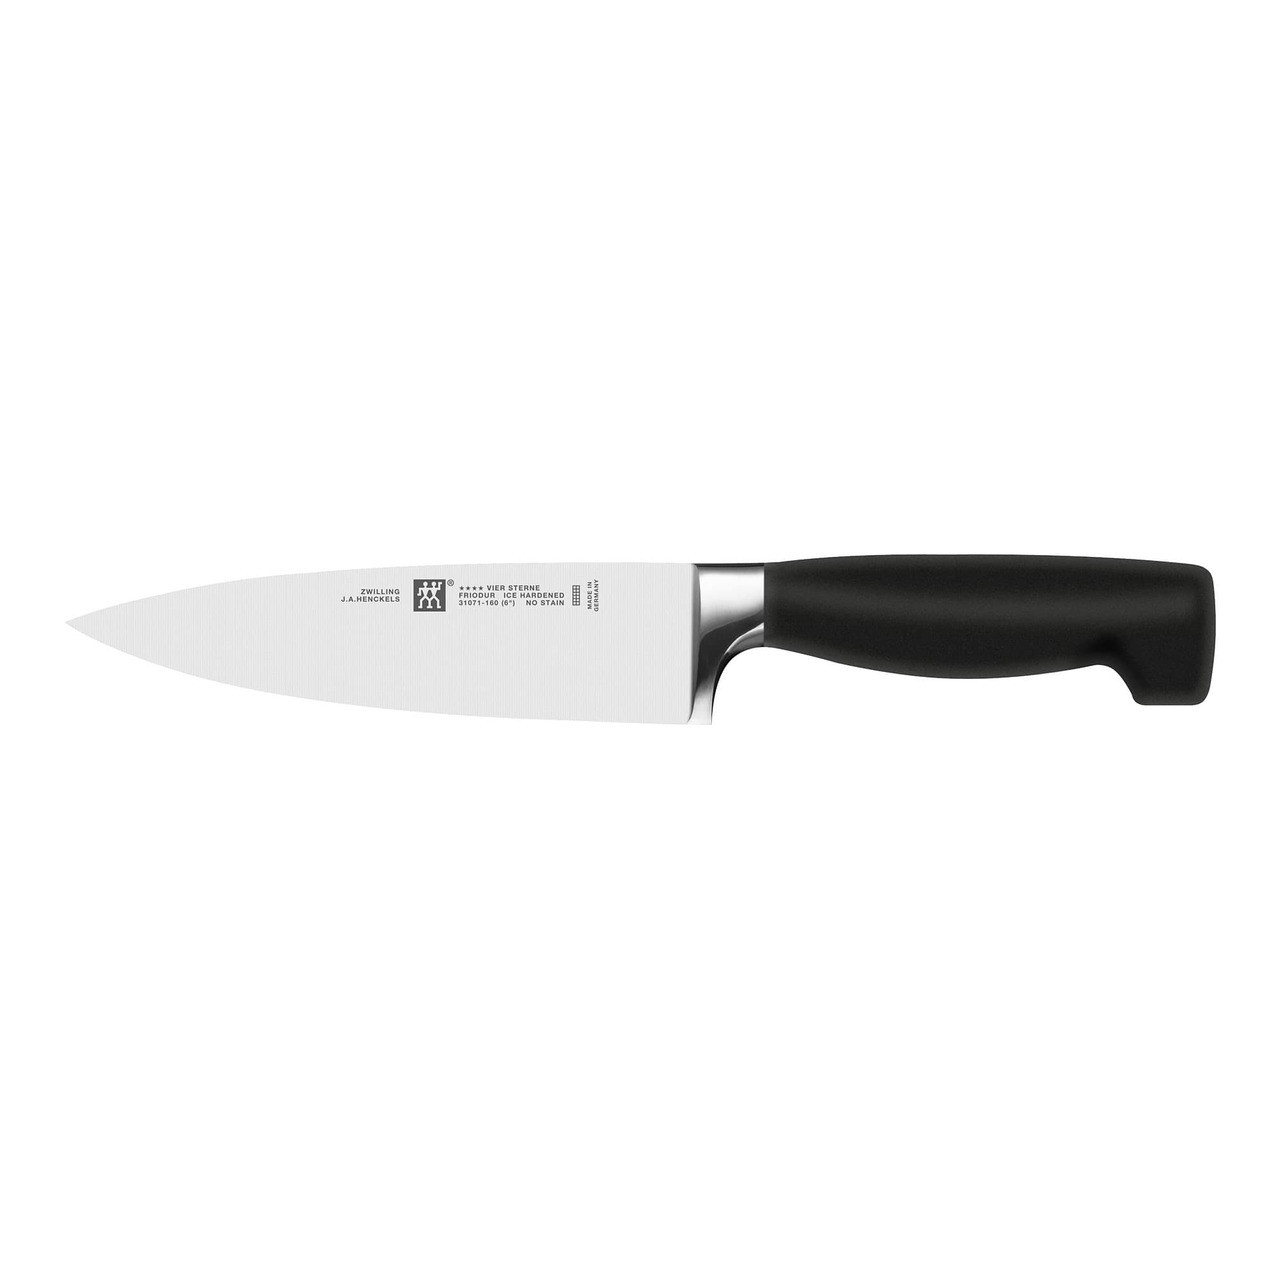 https://cdn11.bigcommerce.com/s-hccytny0od/images/stencil/1280x1280/products/593/683/zwilling-ja-henckels-four-star-chefs-knife__50434.1509663971.jpg?c=2?imbypass=on